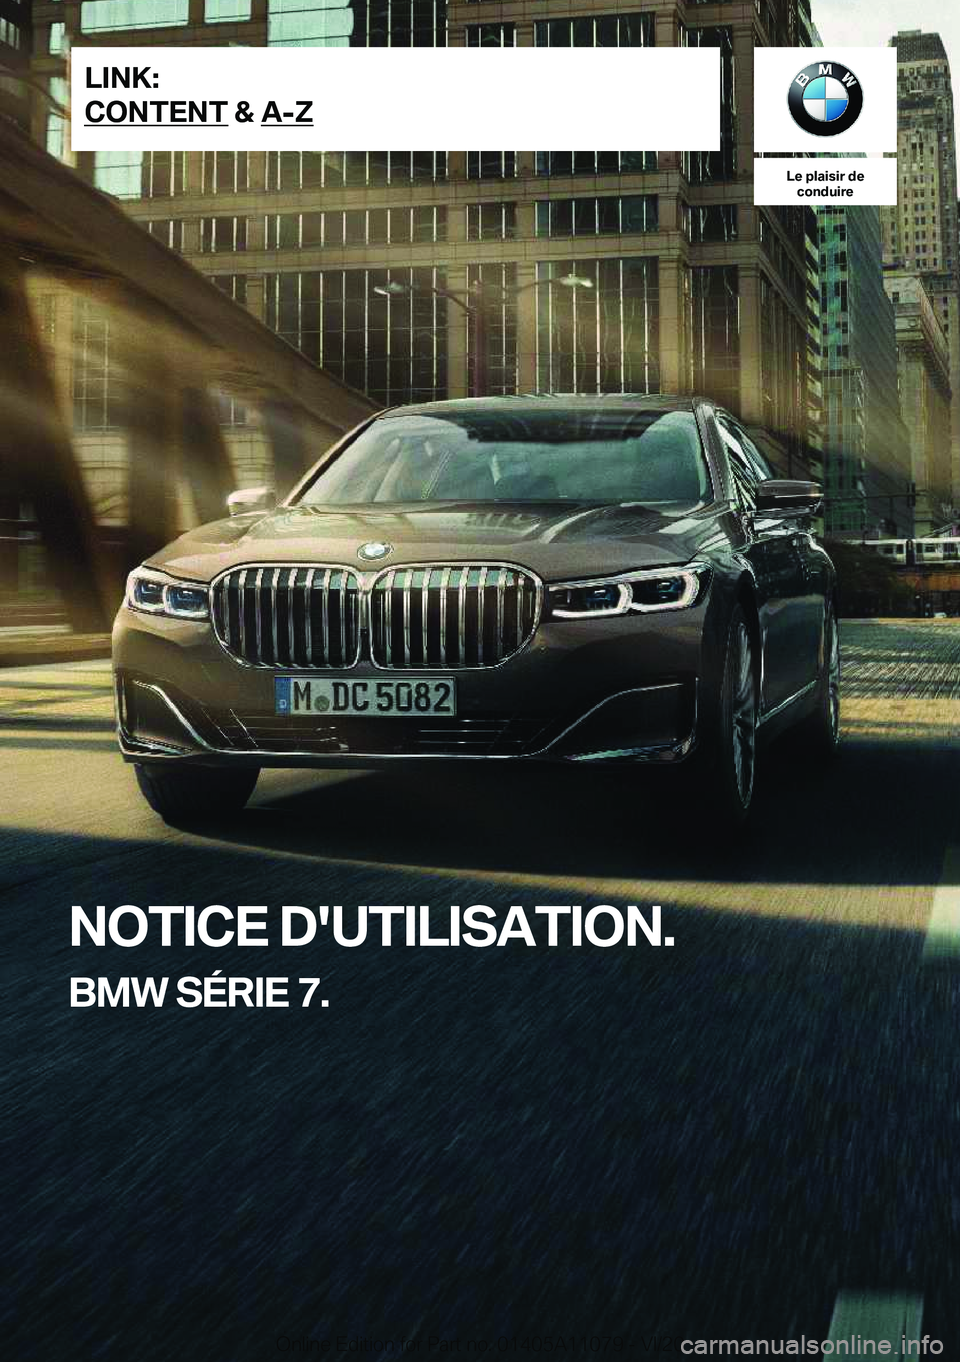 BMW 7 SERIES 2021  Notices Demploi (in French) �L�e��p�l�a�i�s�i�r��d�e�c�o�n�d�u�i�r�e
�N�O�T�I�C�E��D�'�U�T�I�L�I�S�A�T�I�O�N�.
�B�M�W��S�É�R�I�E��7�.�L�I�N�K�:
�C�O�N�T�E�N�T��&��A�-�Z�O�n�l�i�n�e��E�d�i�t�i�o�n��f�o�r��P�a�r�t�